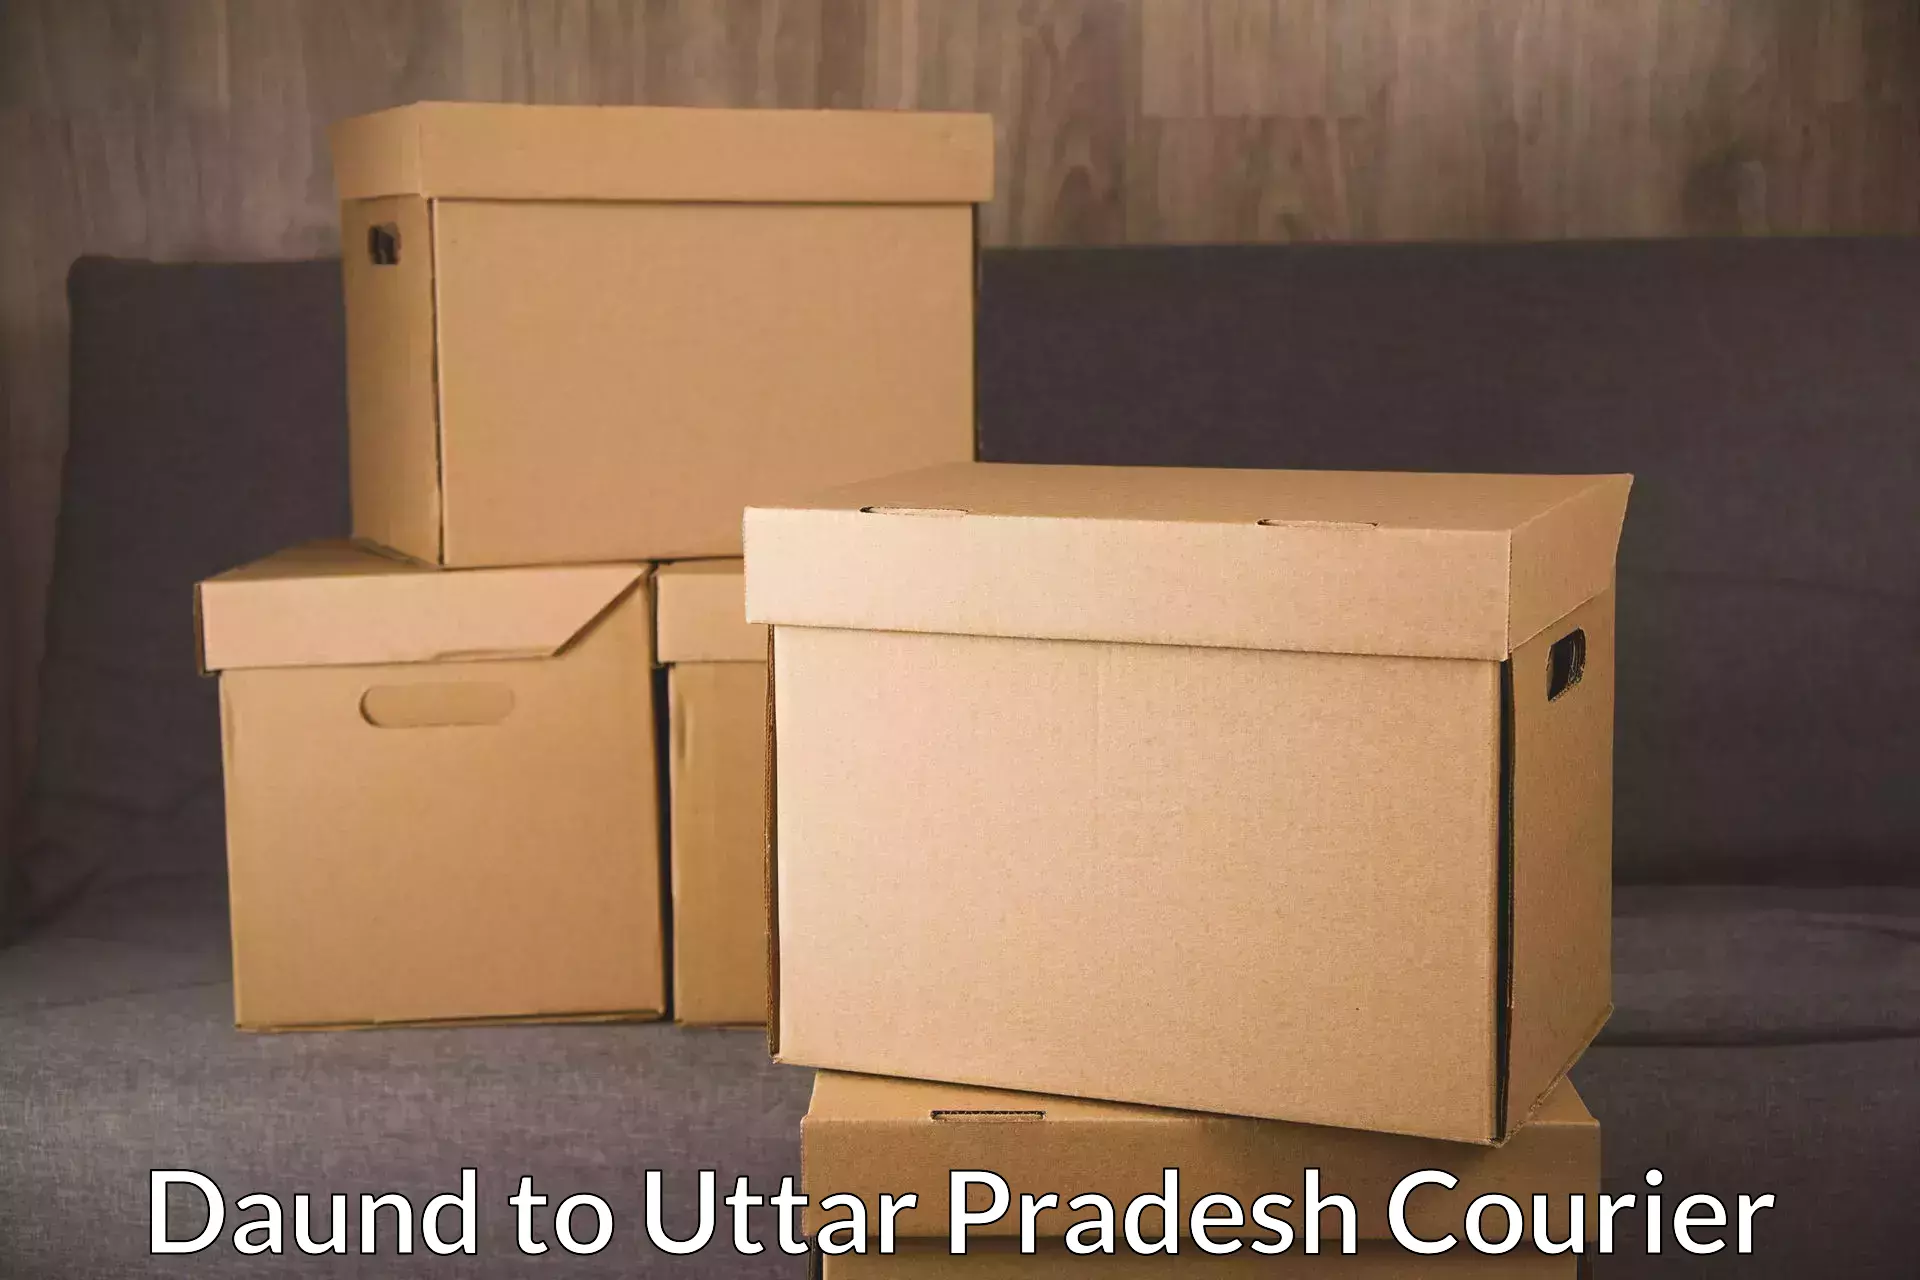 On-demand delivery in Daund to Aligarh